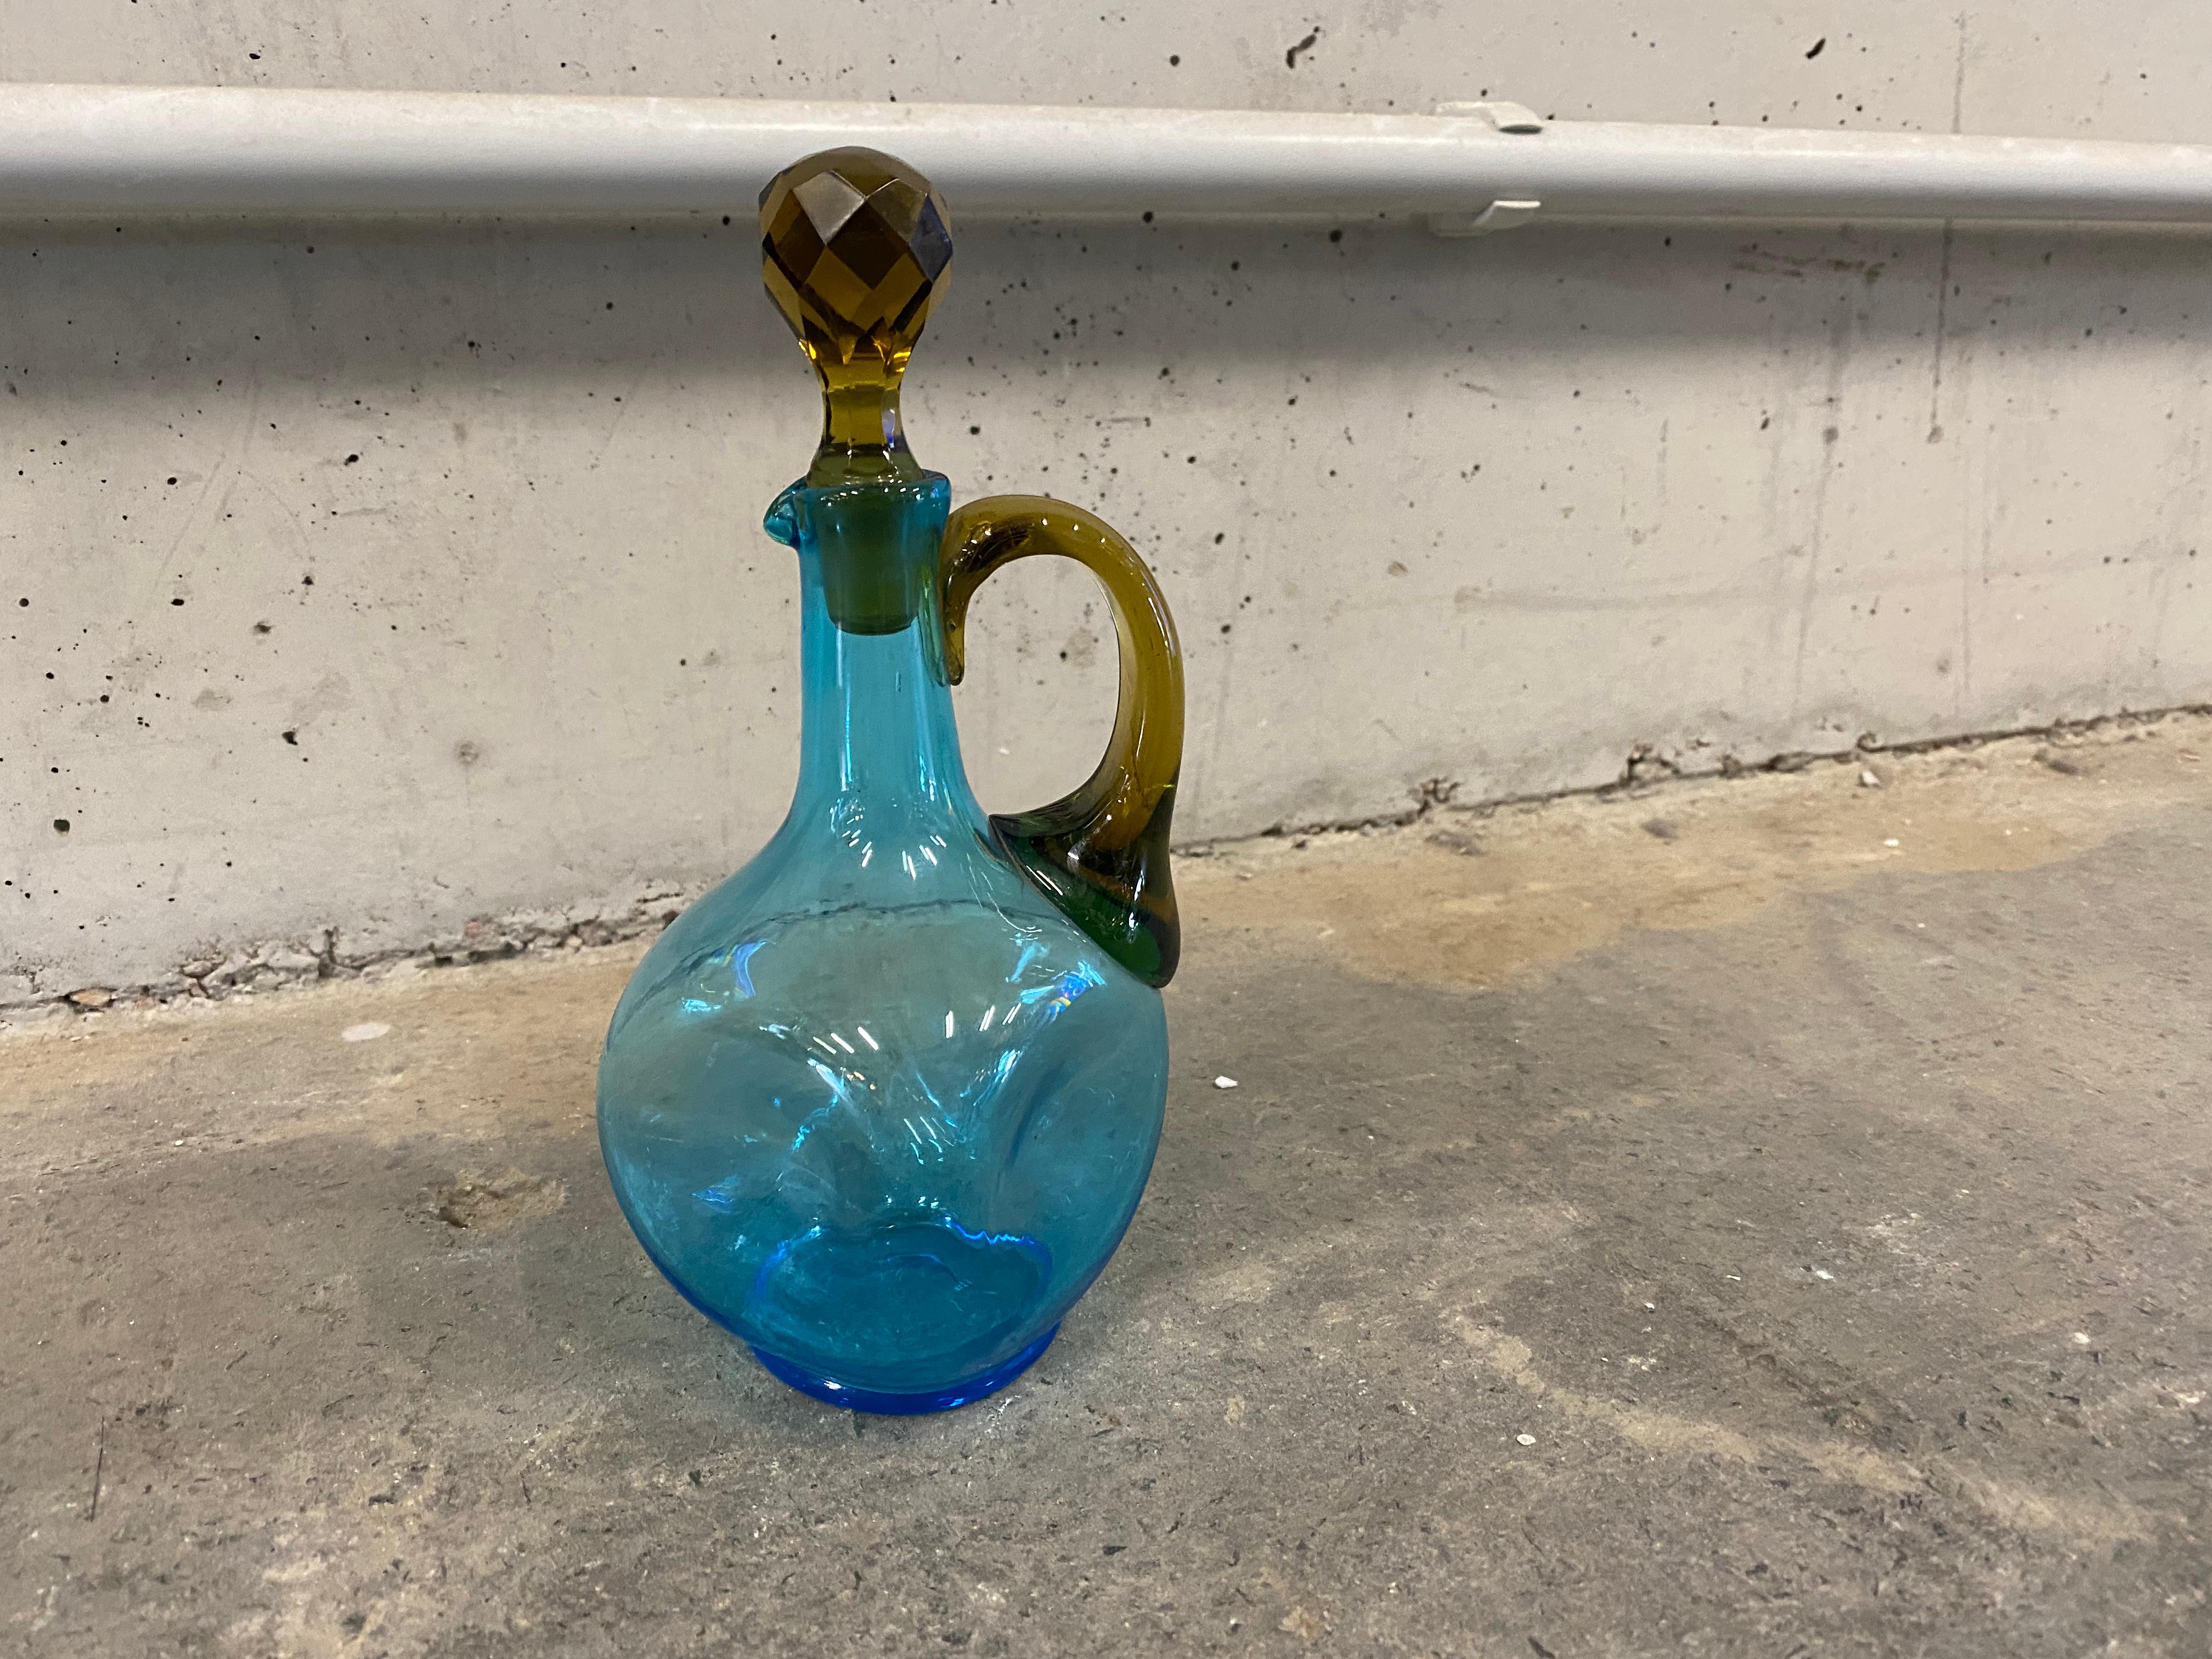 Antique small stopper carafe from France from the years around 1900. The carafe has a bulbous body and opens into a narrow neck, which is closed by a stopper in the form of diamond stones. The mixture of green and blue clear glass makes this carafe